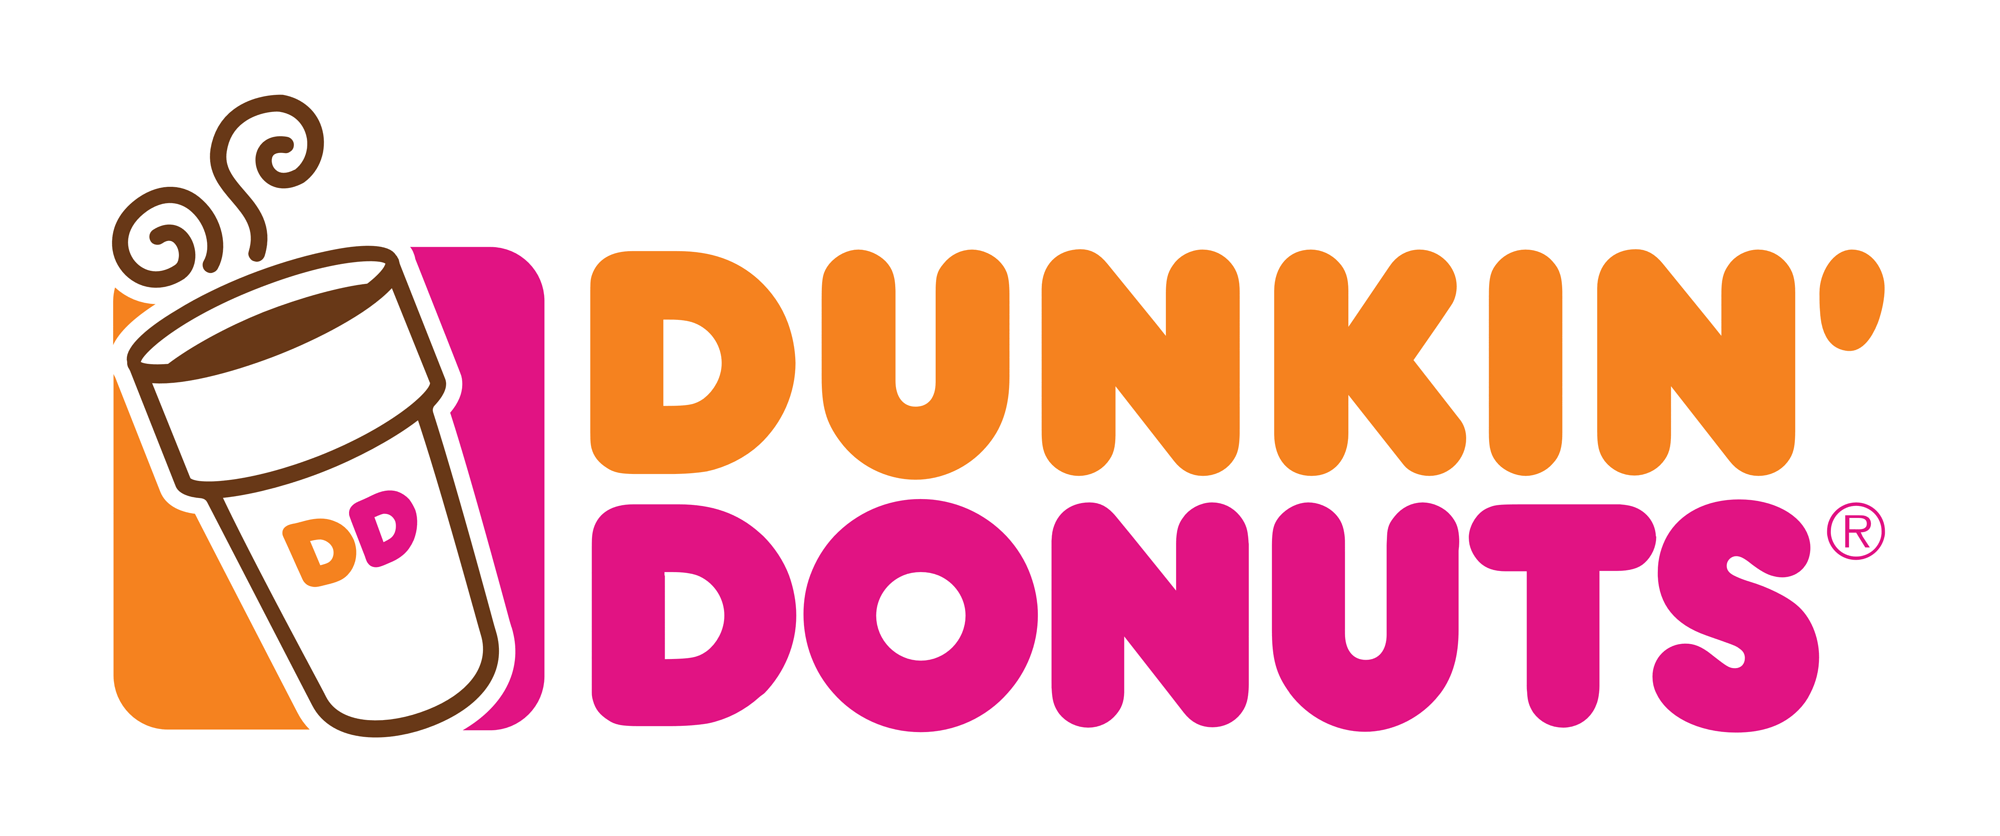 Pink and Orange Logo - Dunkin Donuts Logo, Dunkin Donuts Symbol, Meaning, History and Evolution